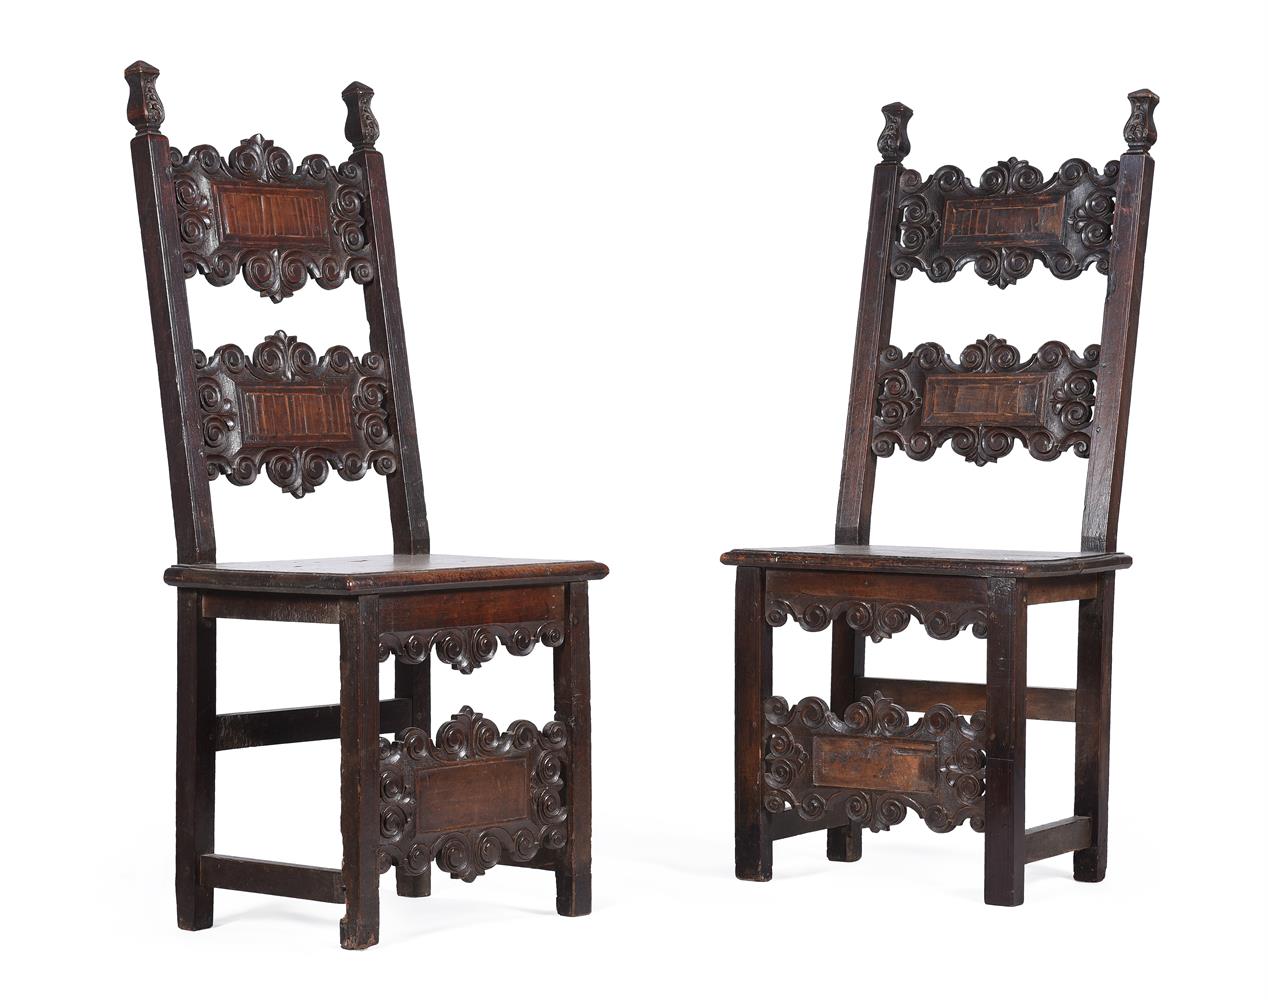 A MATCHED PAIR OF ITALIAN CARVED WALNUT CHAIRS, PROBABLY LOMBARDY, 17TH CENTURY - Image 5 of 5